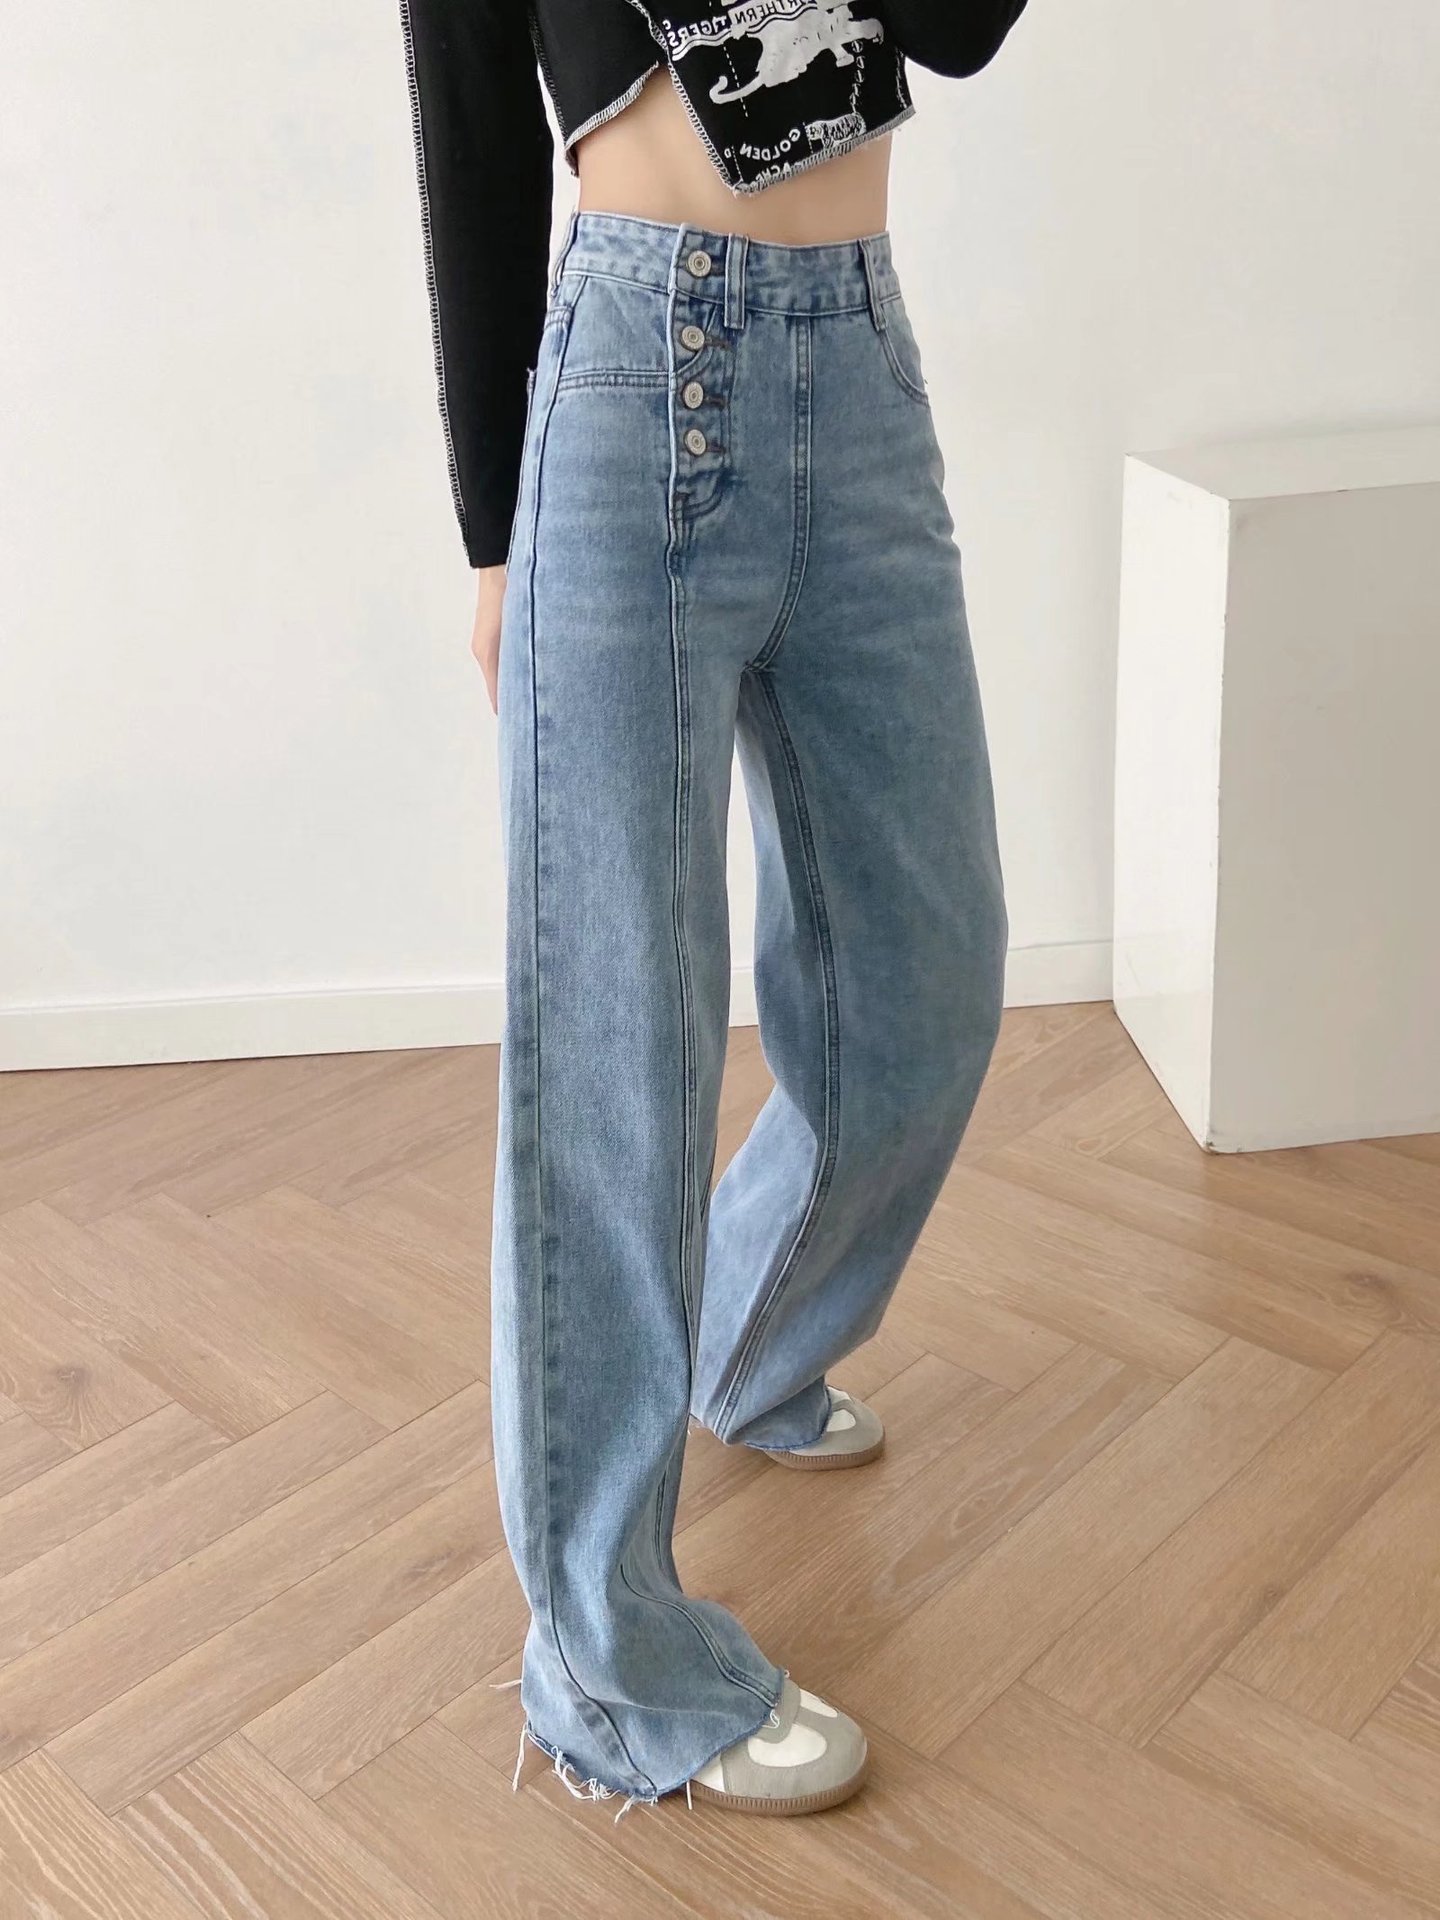 European and American Style Irregular Breasted High Waist Jeans Women's Jeans Elegant Loose Raw Hem Straight-Leg Trousers Draping Mopping Pants